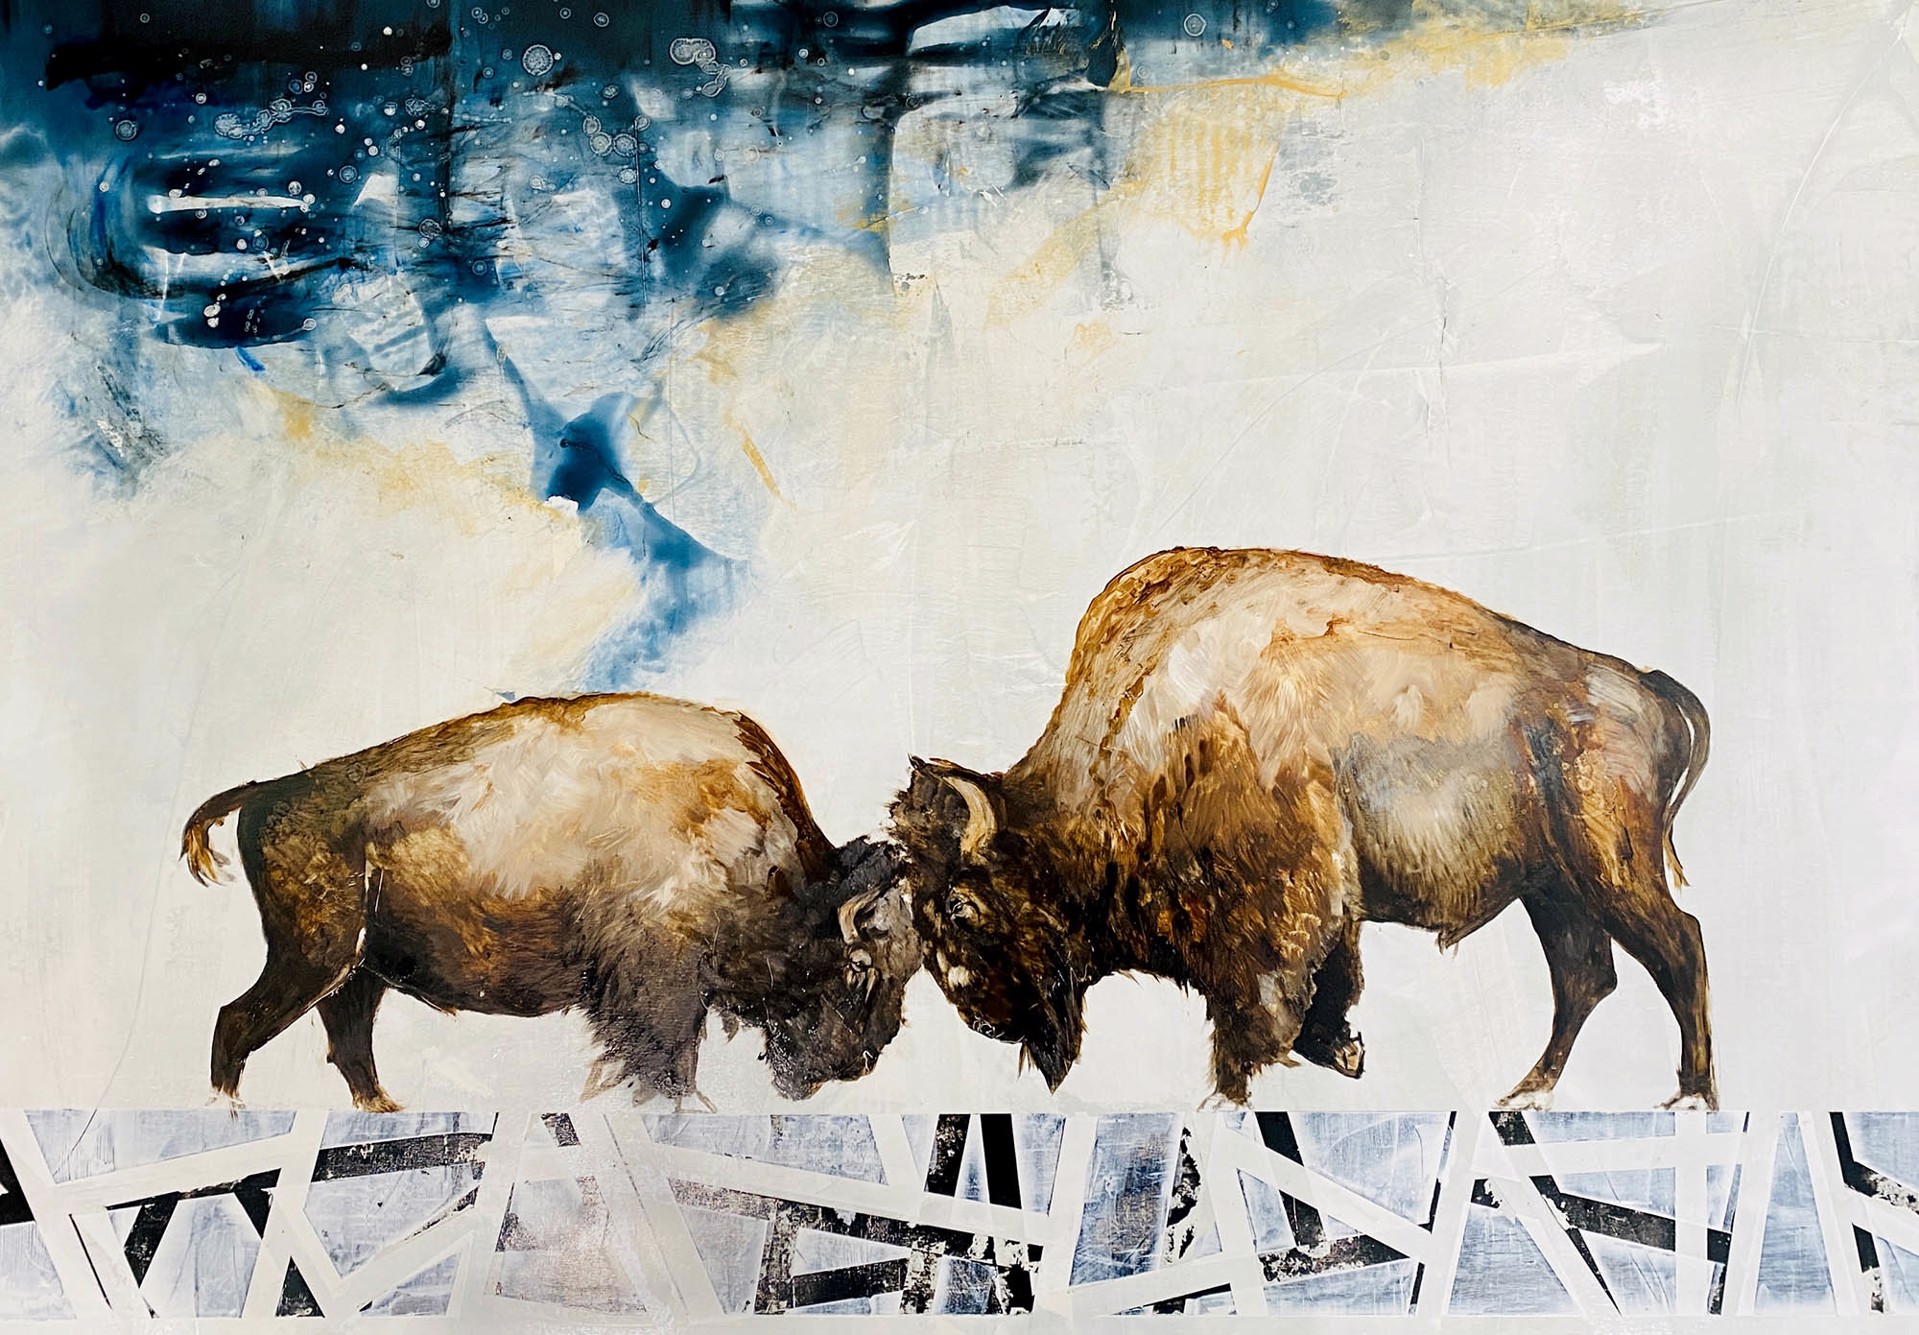 Original Oil Painting Featuring Two Bison Butting Heads Over Abstracted Landscape Background